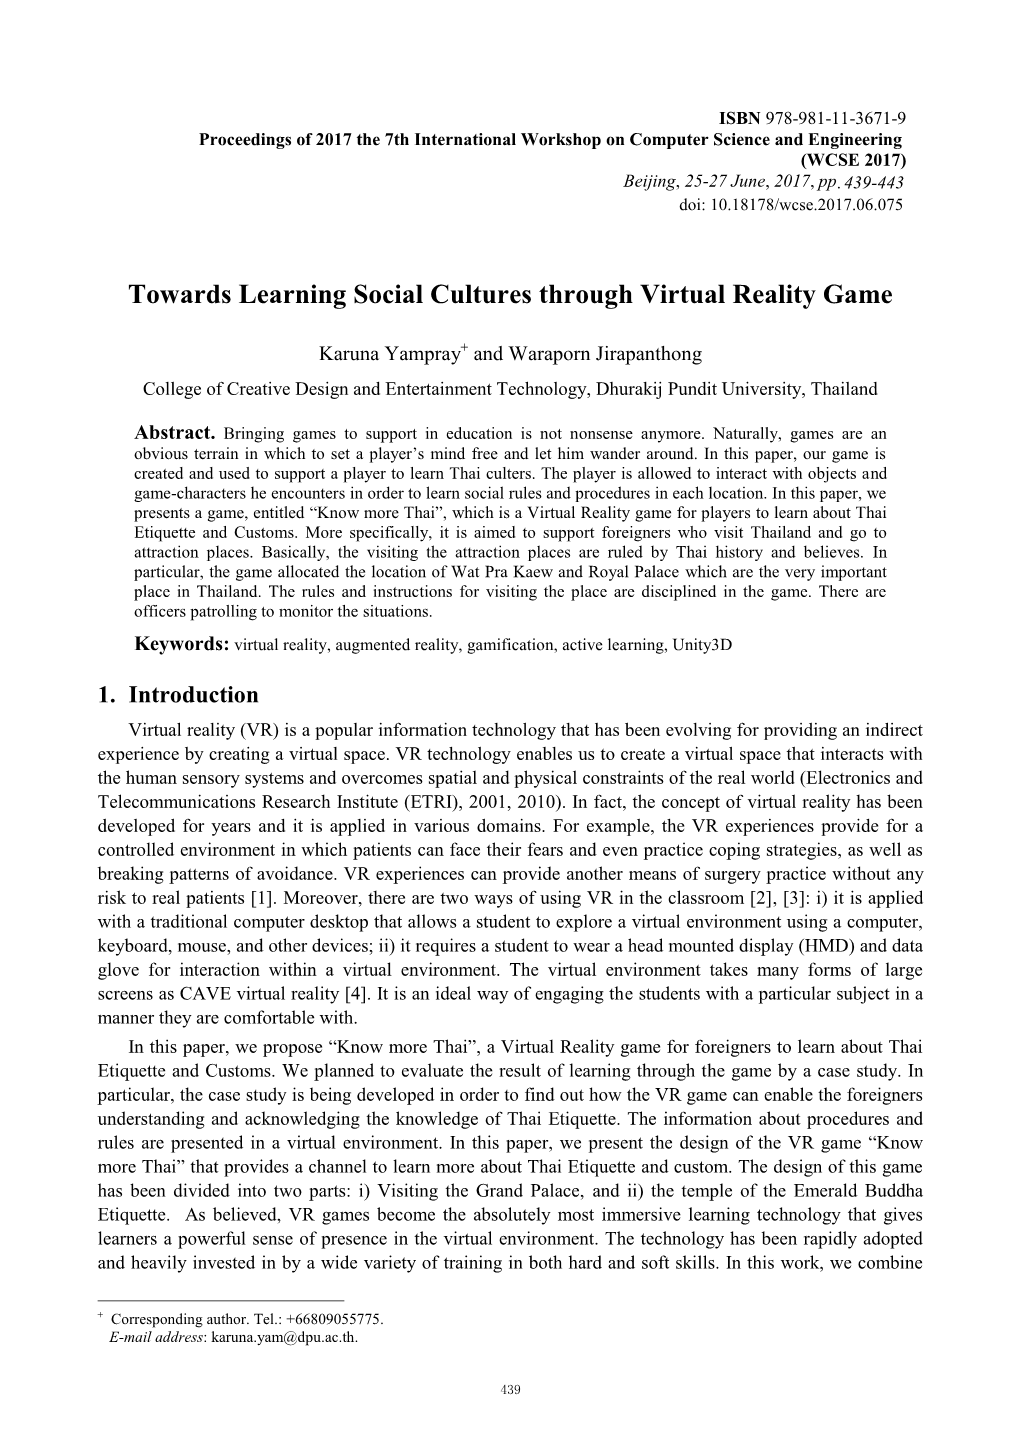 Towards Learning Social Cultures Through Virtual Reality Game